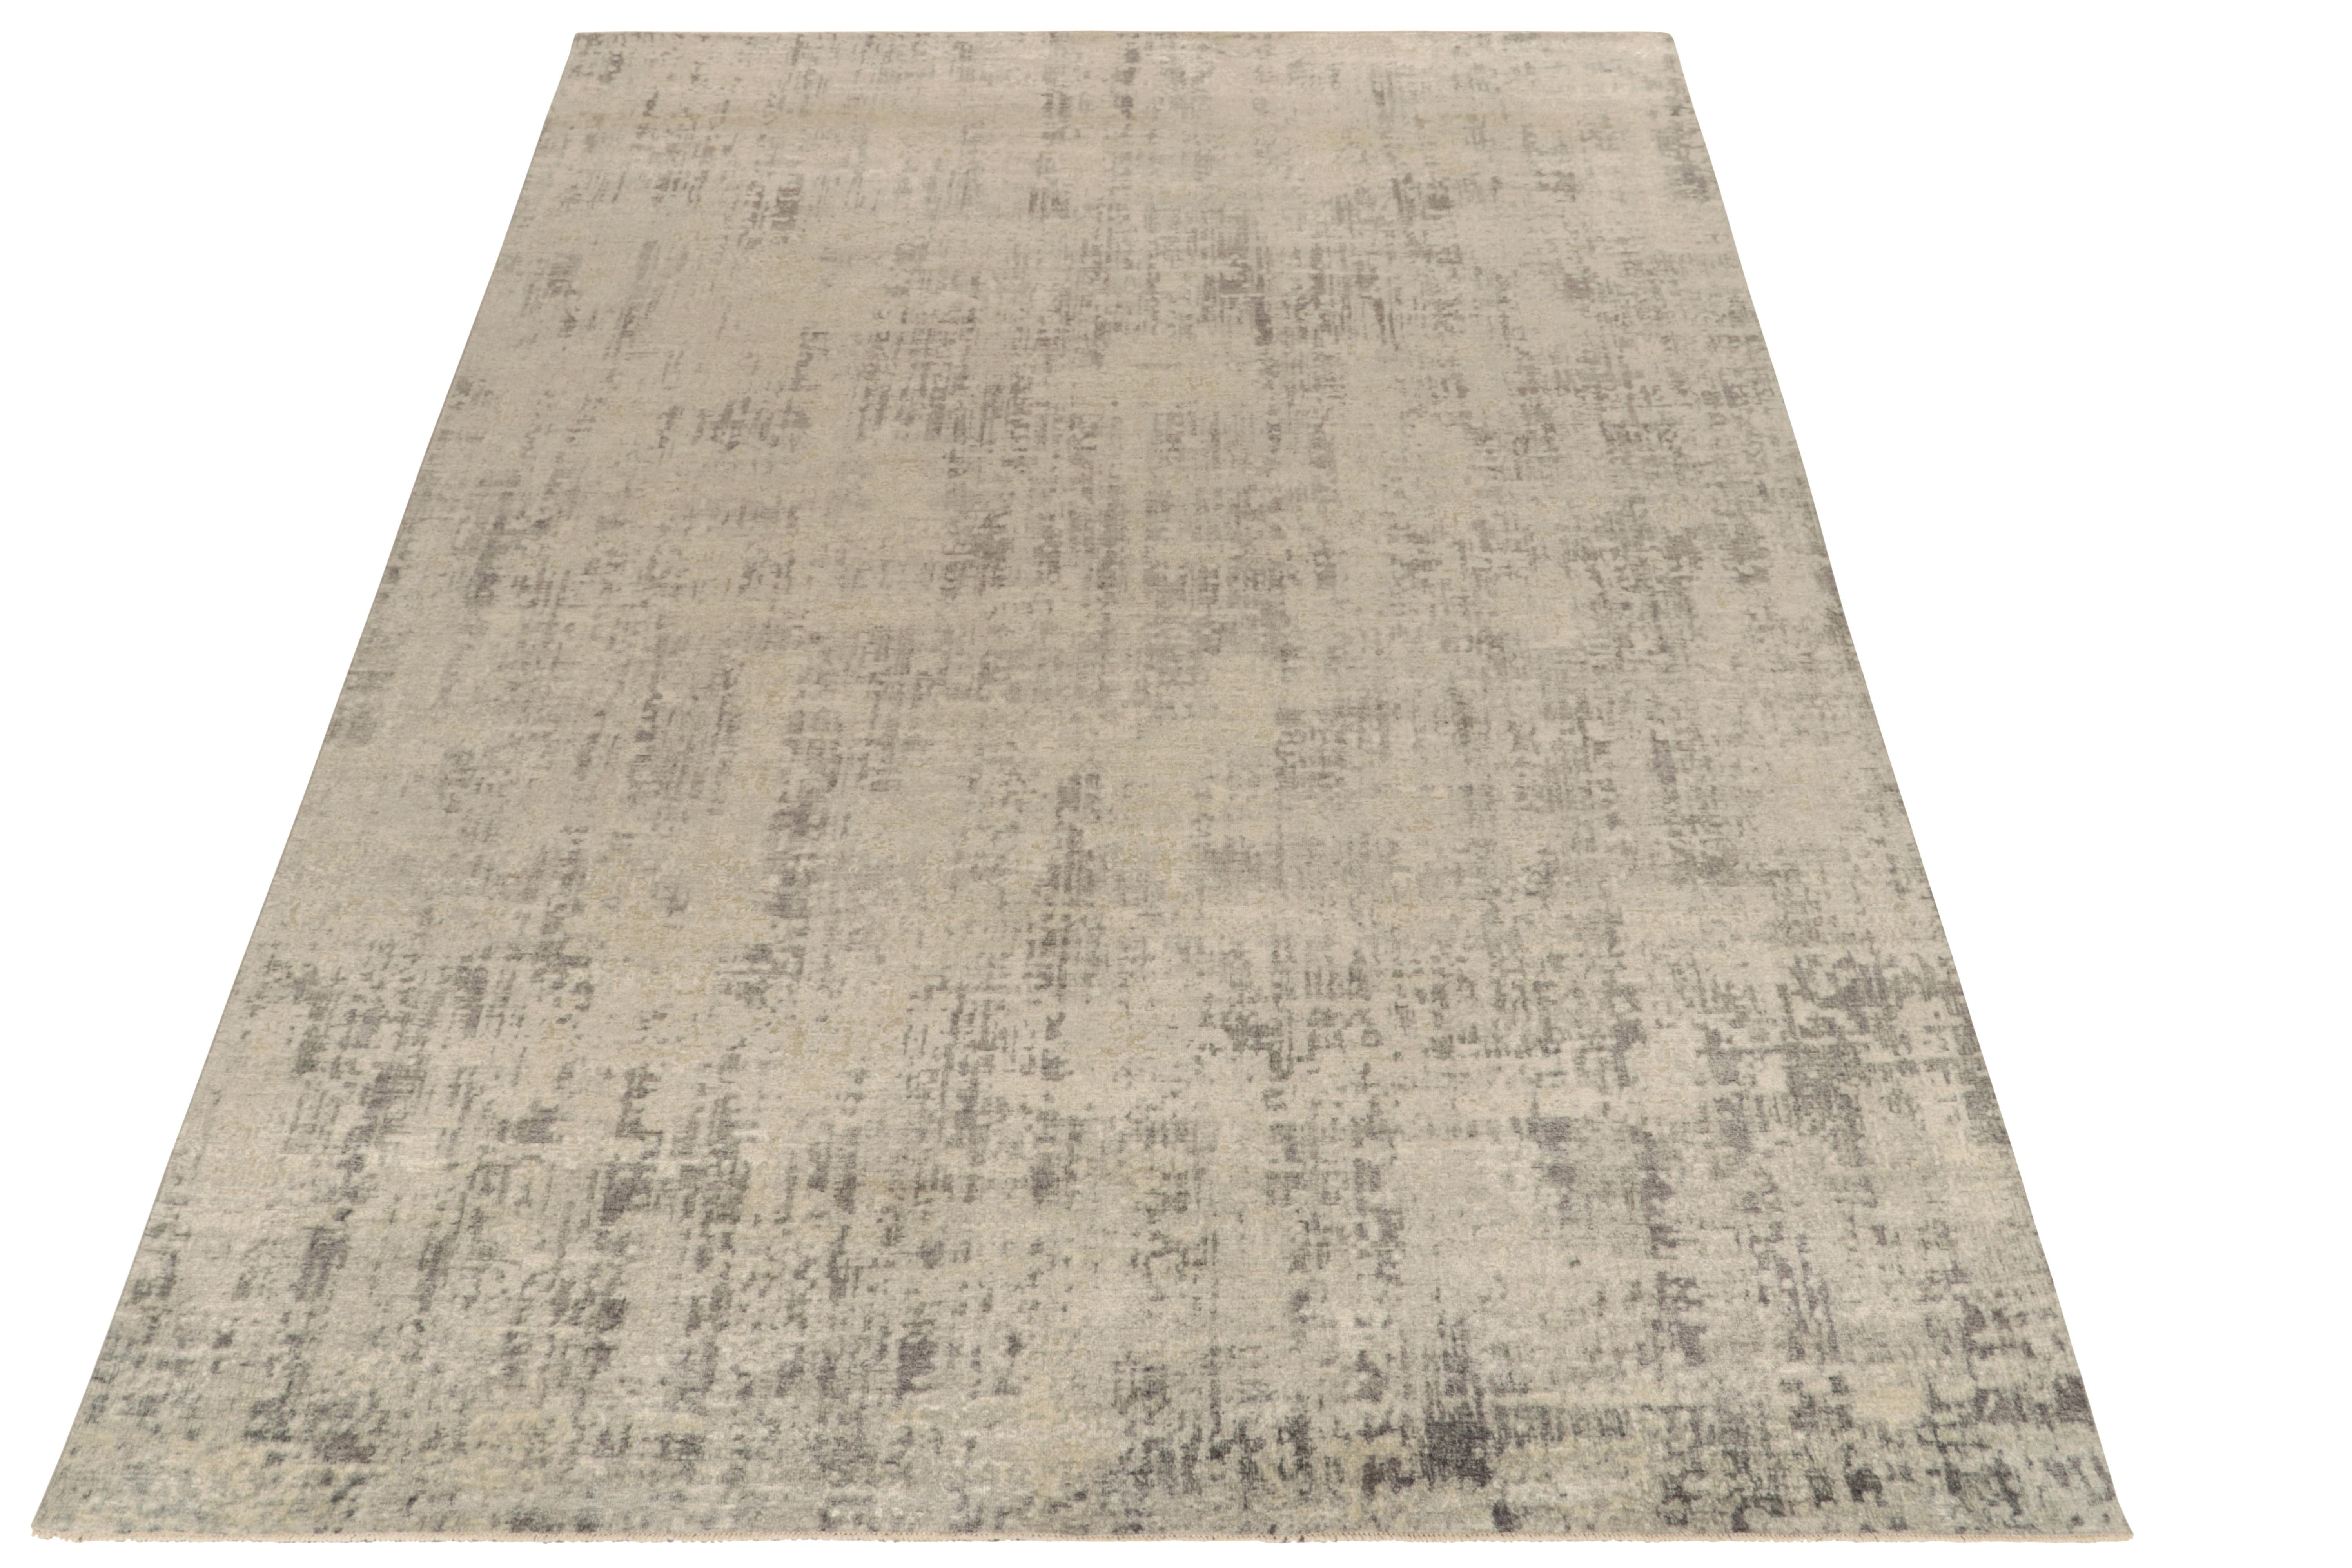 This 9×12 abstract rug is a bold new addition to Rug & Kilim’s Modern Collection. hand knotted in wool and silk, it enjoys finely detailed greige and taupe striae in its all over pattern.

Keen eyes may further admire the meticulous detail in its